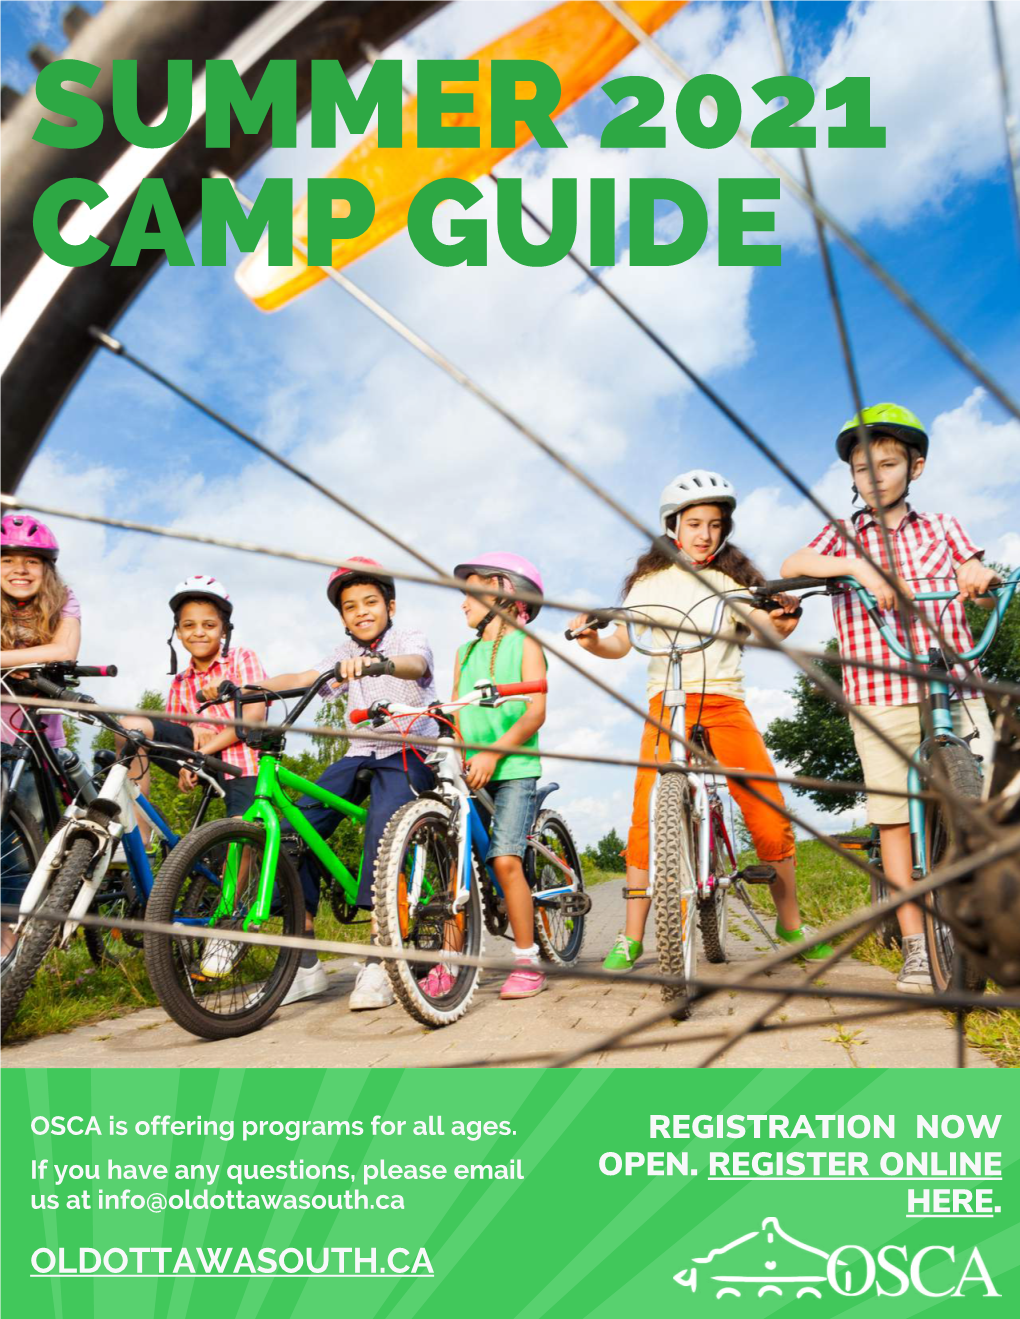 Summer Camps Follow Health and Safety Guidelines Set by Ottawa Public Health, and Groups Are Set at a Manageable Size with These Recommendations in Mind